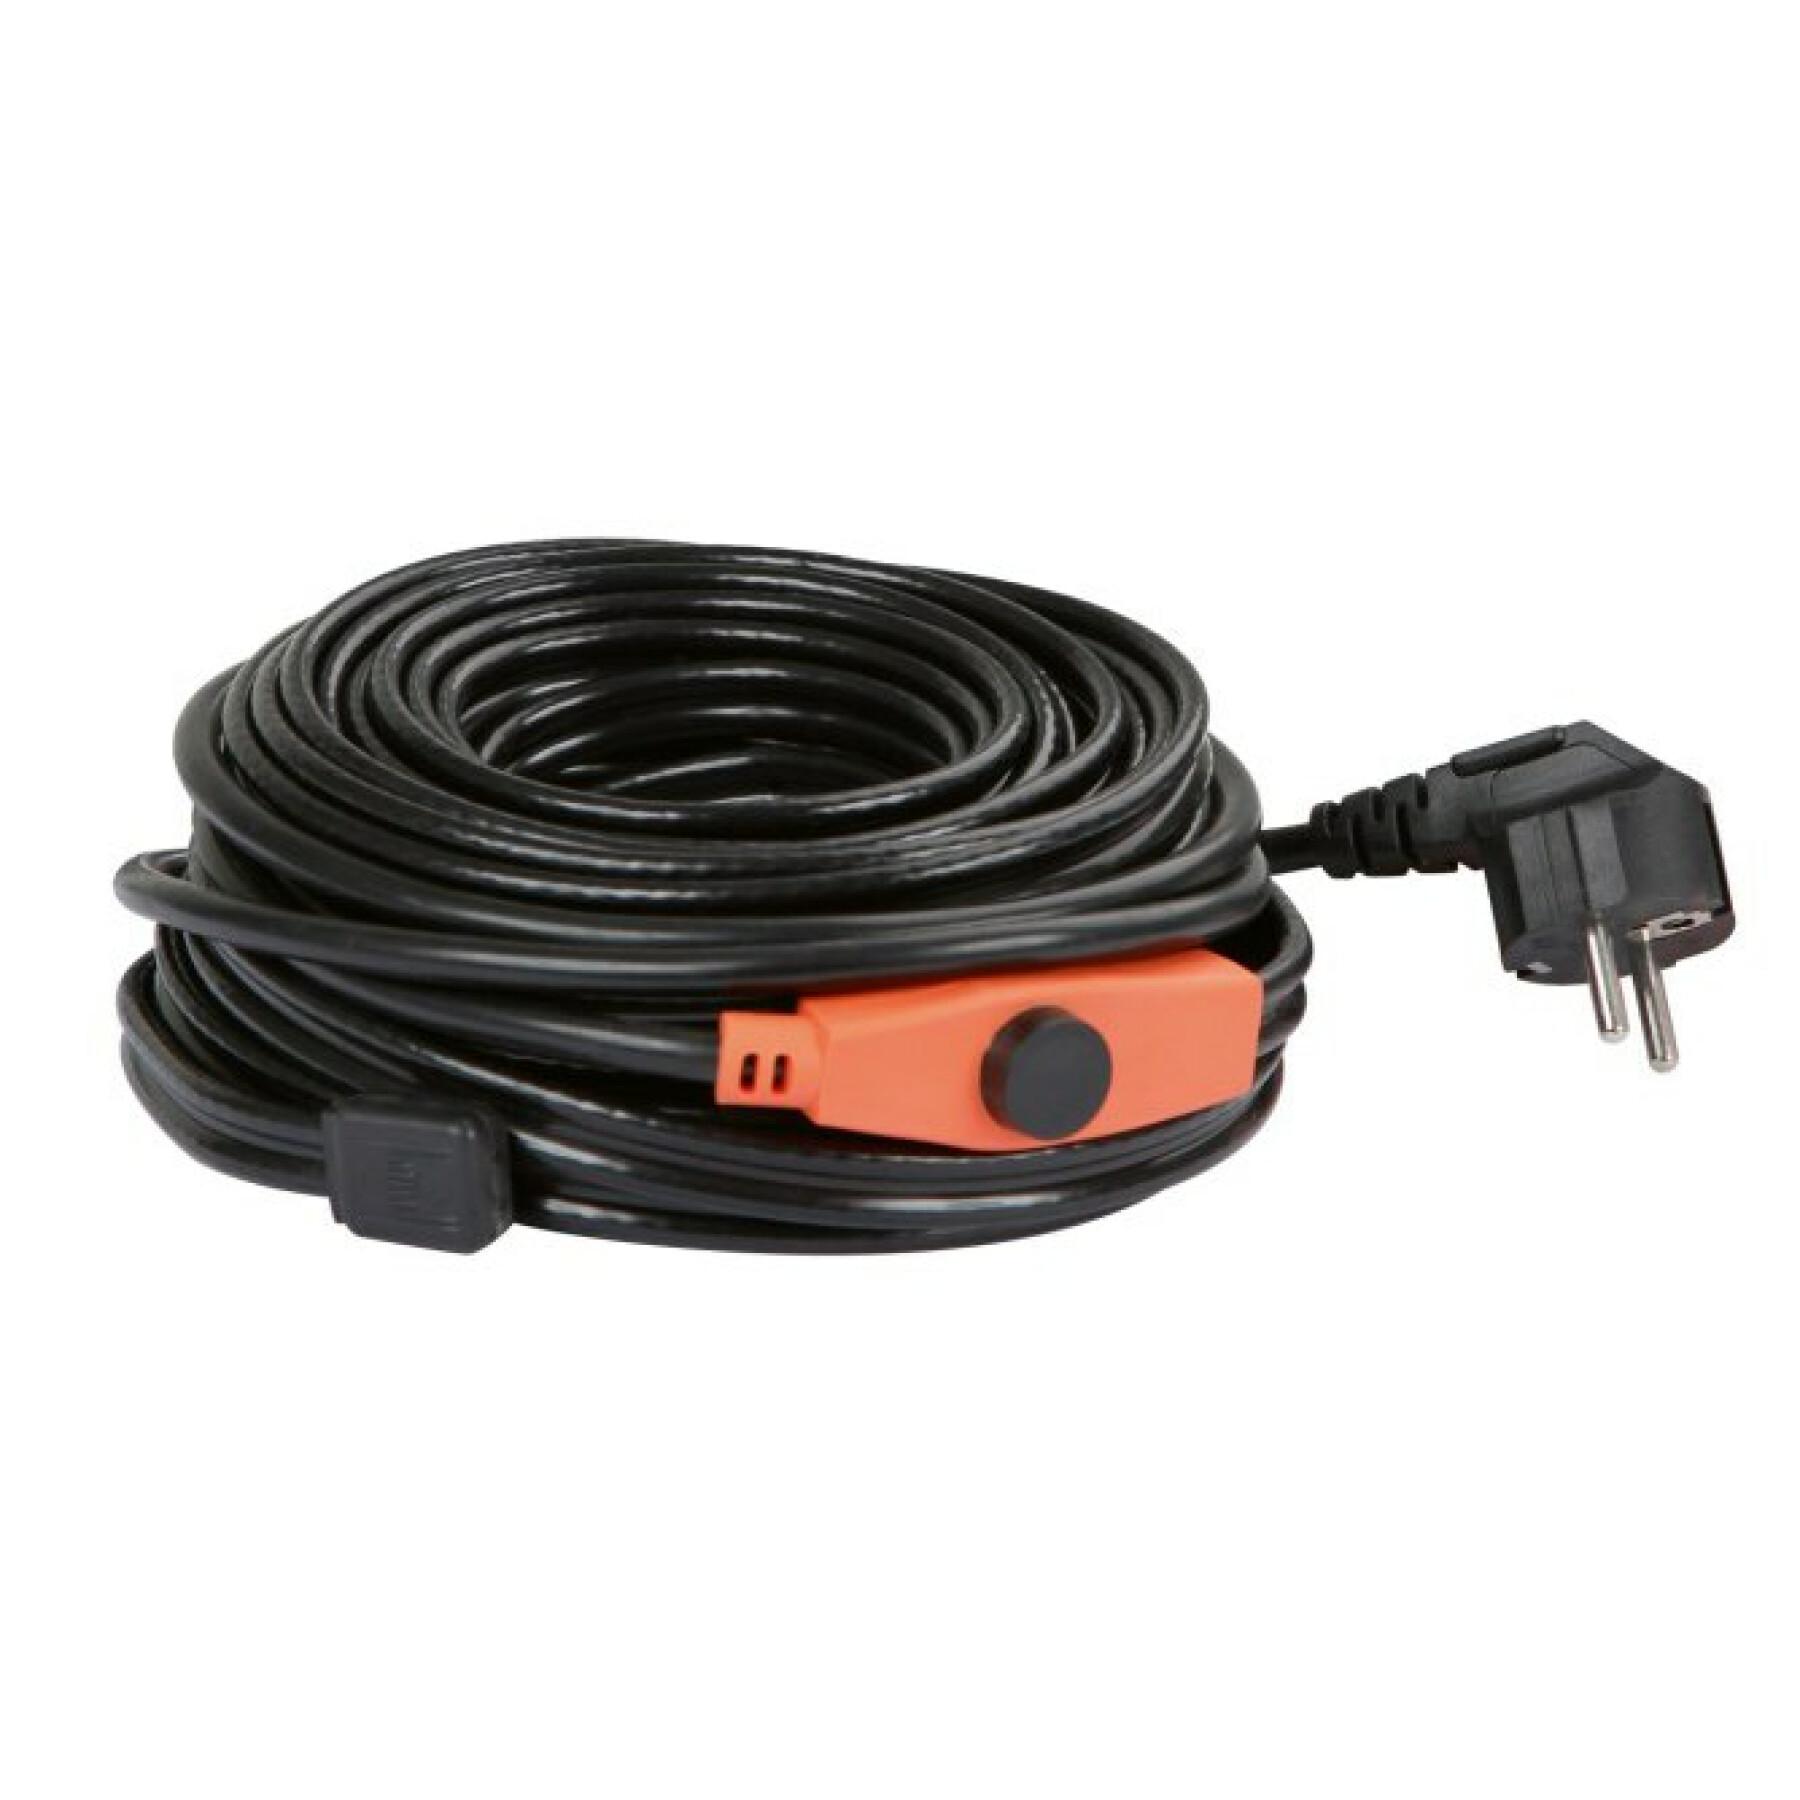 Heating cable Kerbl 230V 24m,384W